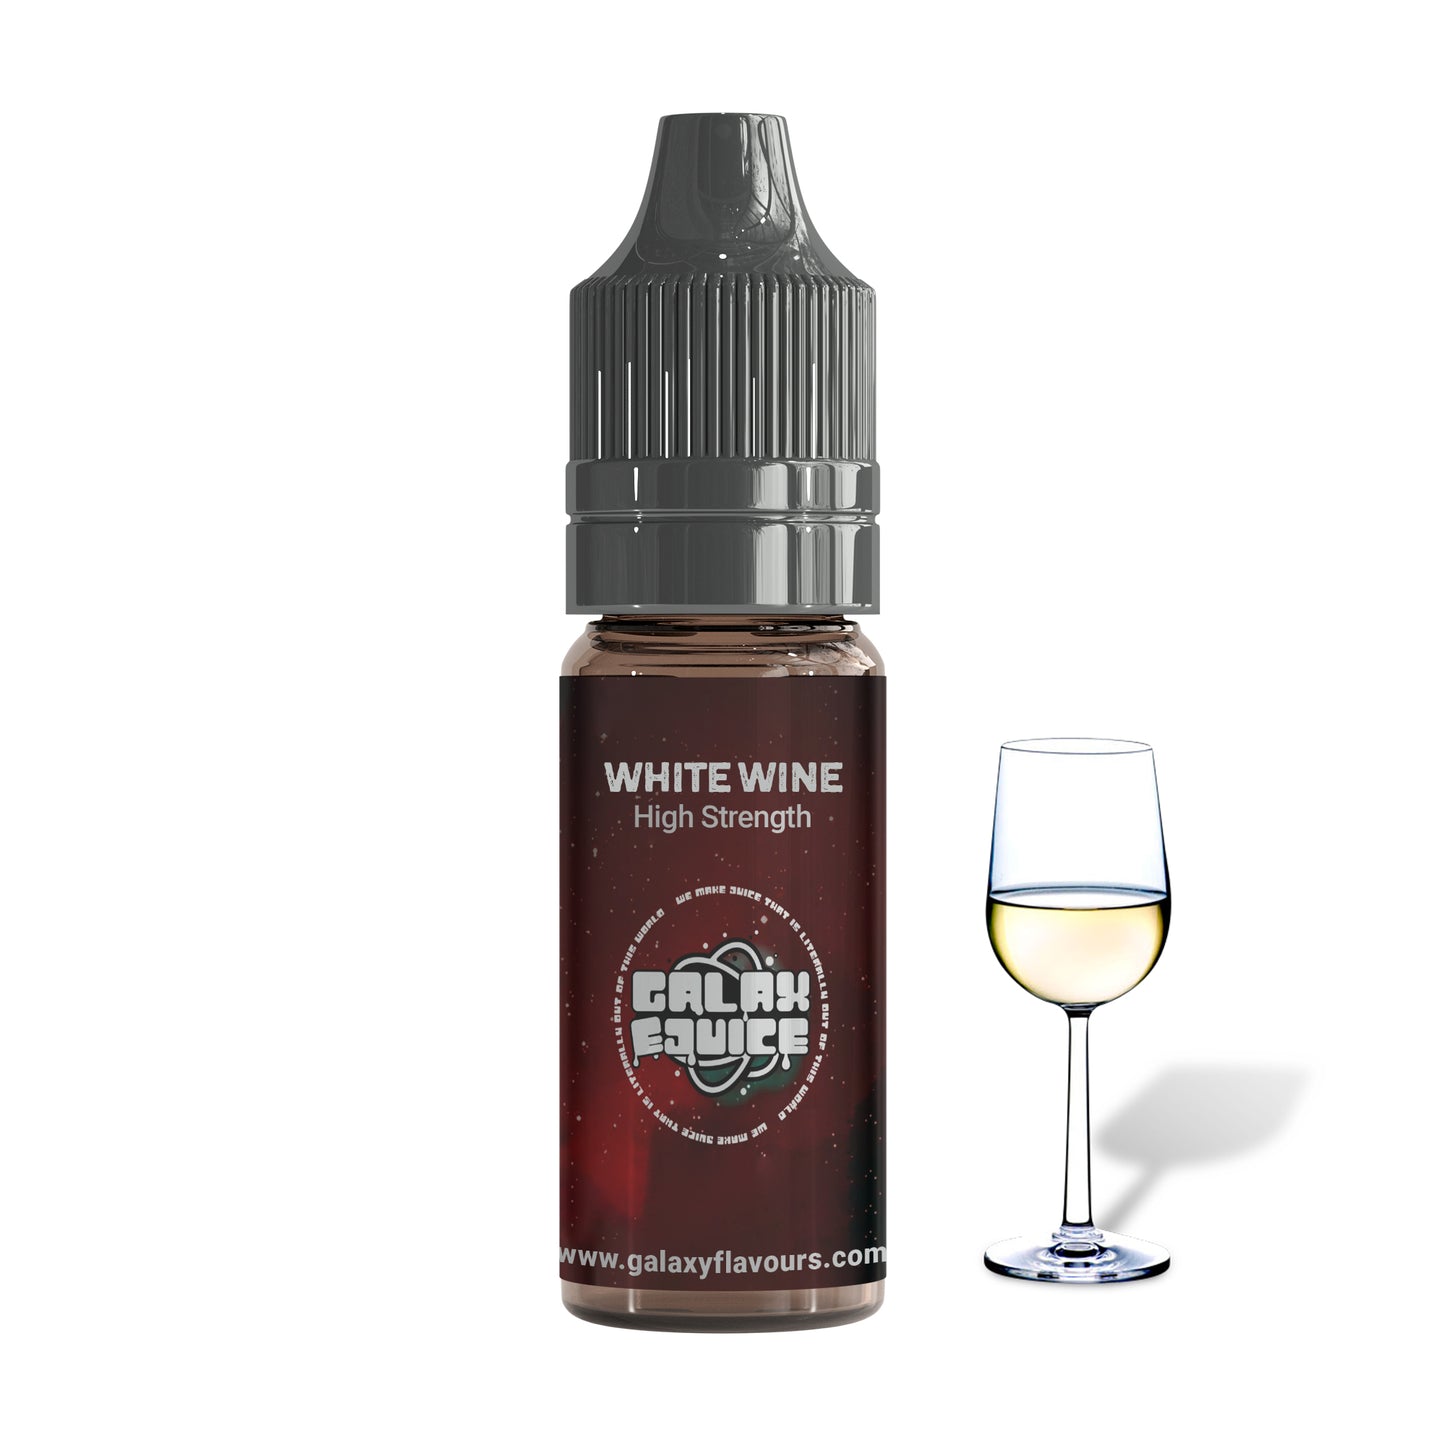 White Wine High Strength Professional Flavouring.